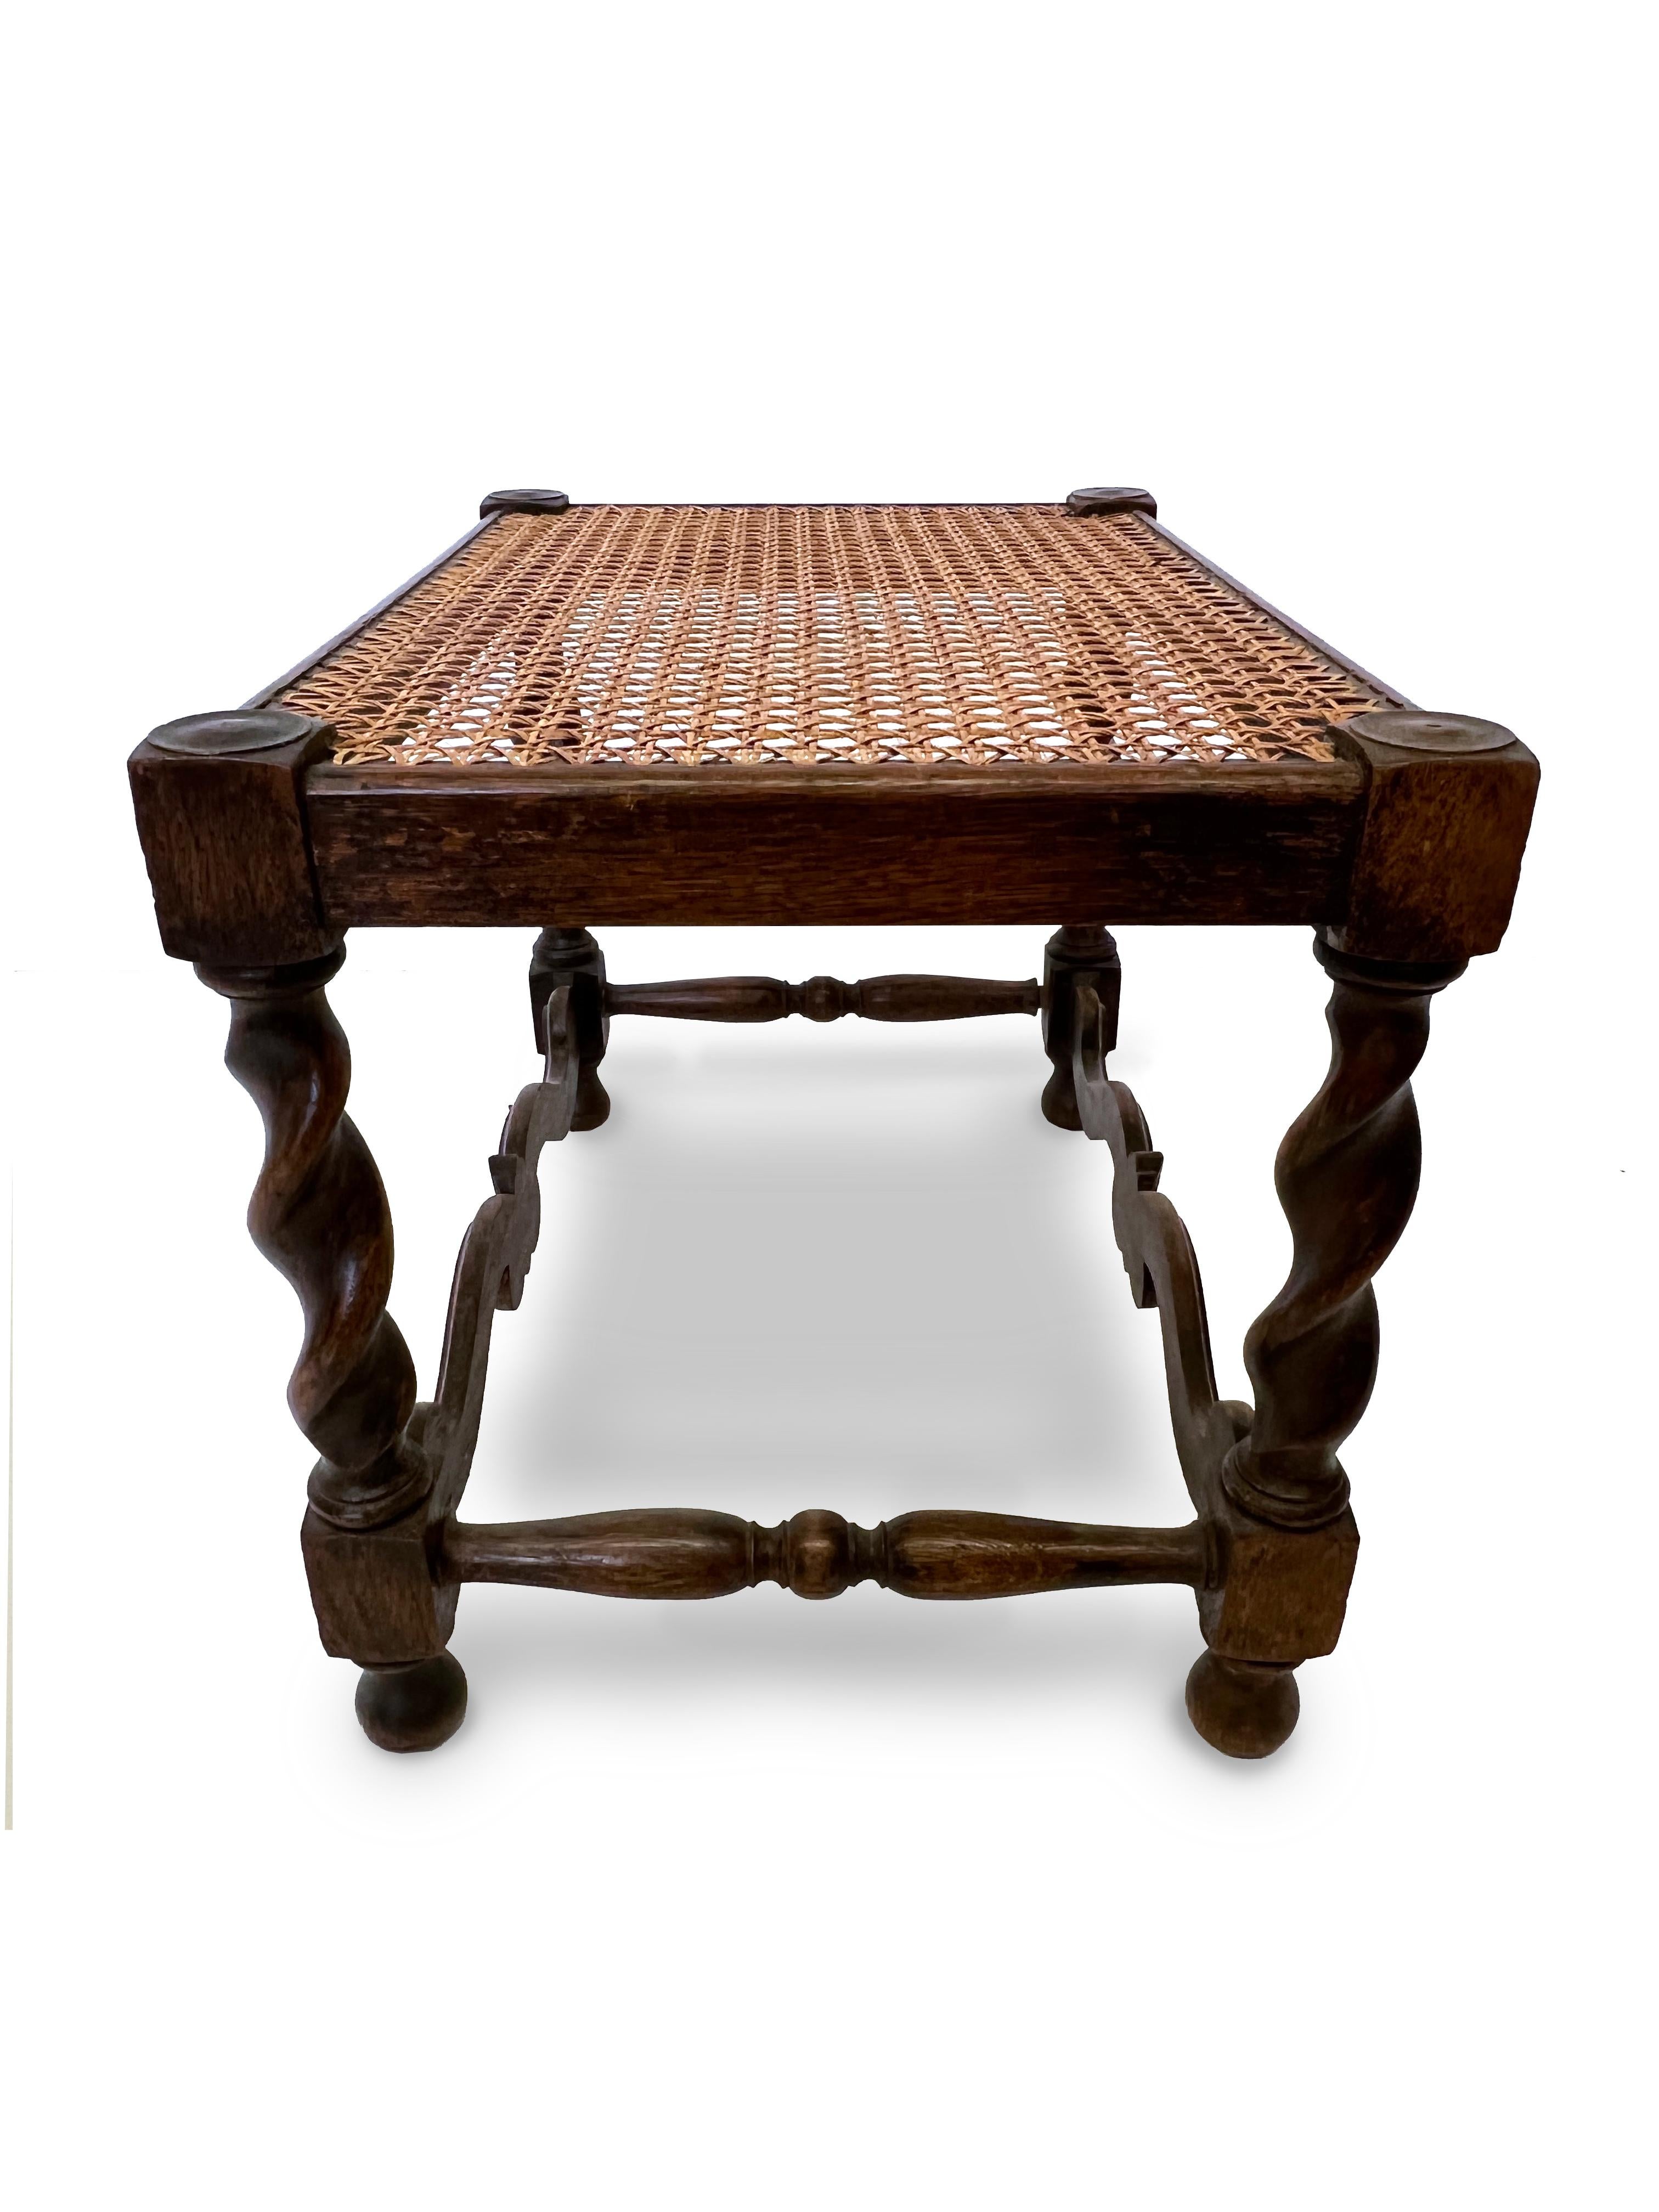 Antique Jacobean English hand carved oak barley twist stool with cane top. A perfect and unique antique stool or bench. In great conditons with original cane top and pear like shaped feet. circa 1900

Property from esteemed interior designer Juan